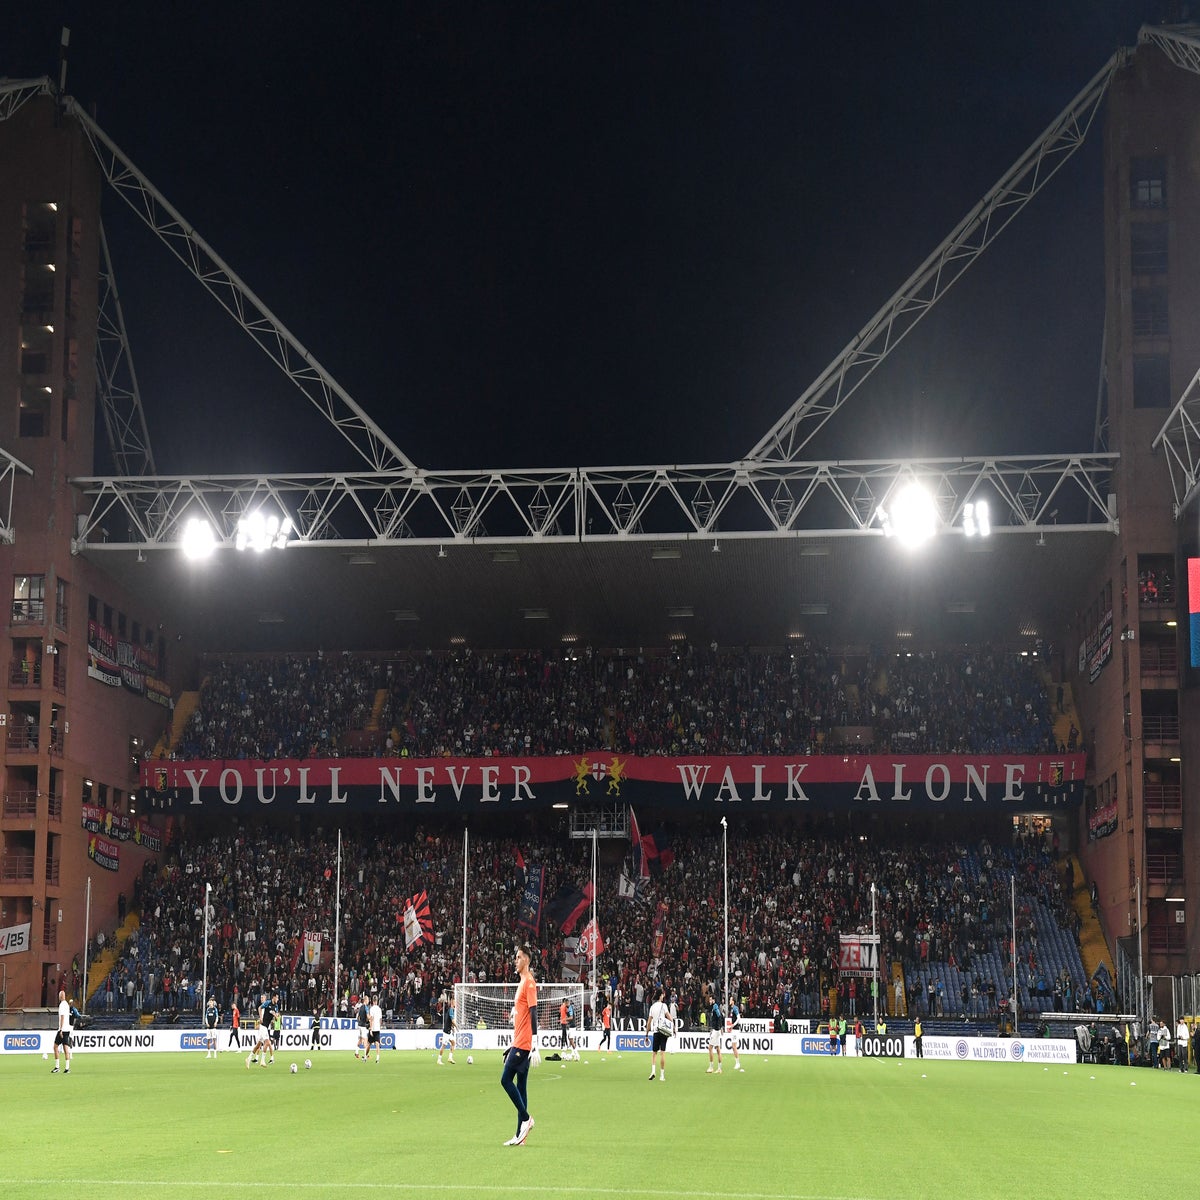 Genoa vs Roma LIVE: Serie A result, final score and reaction